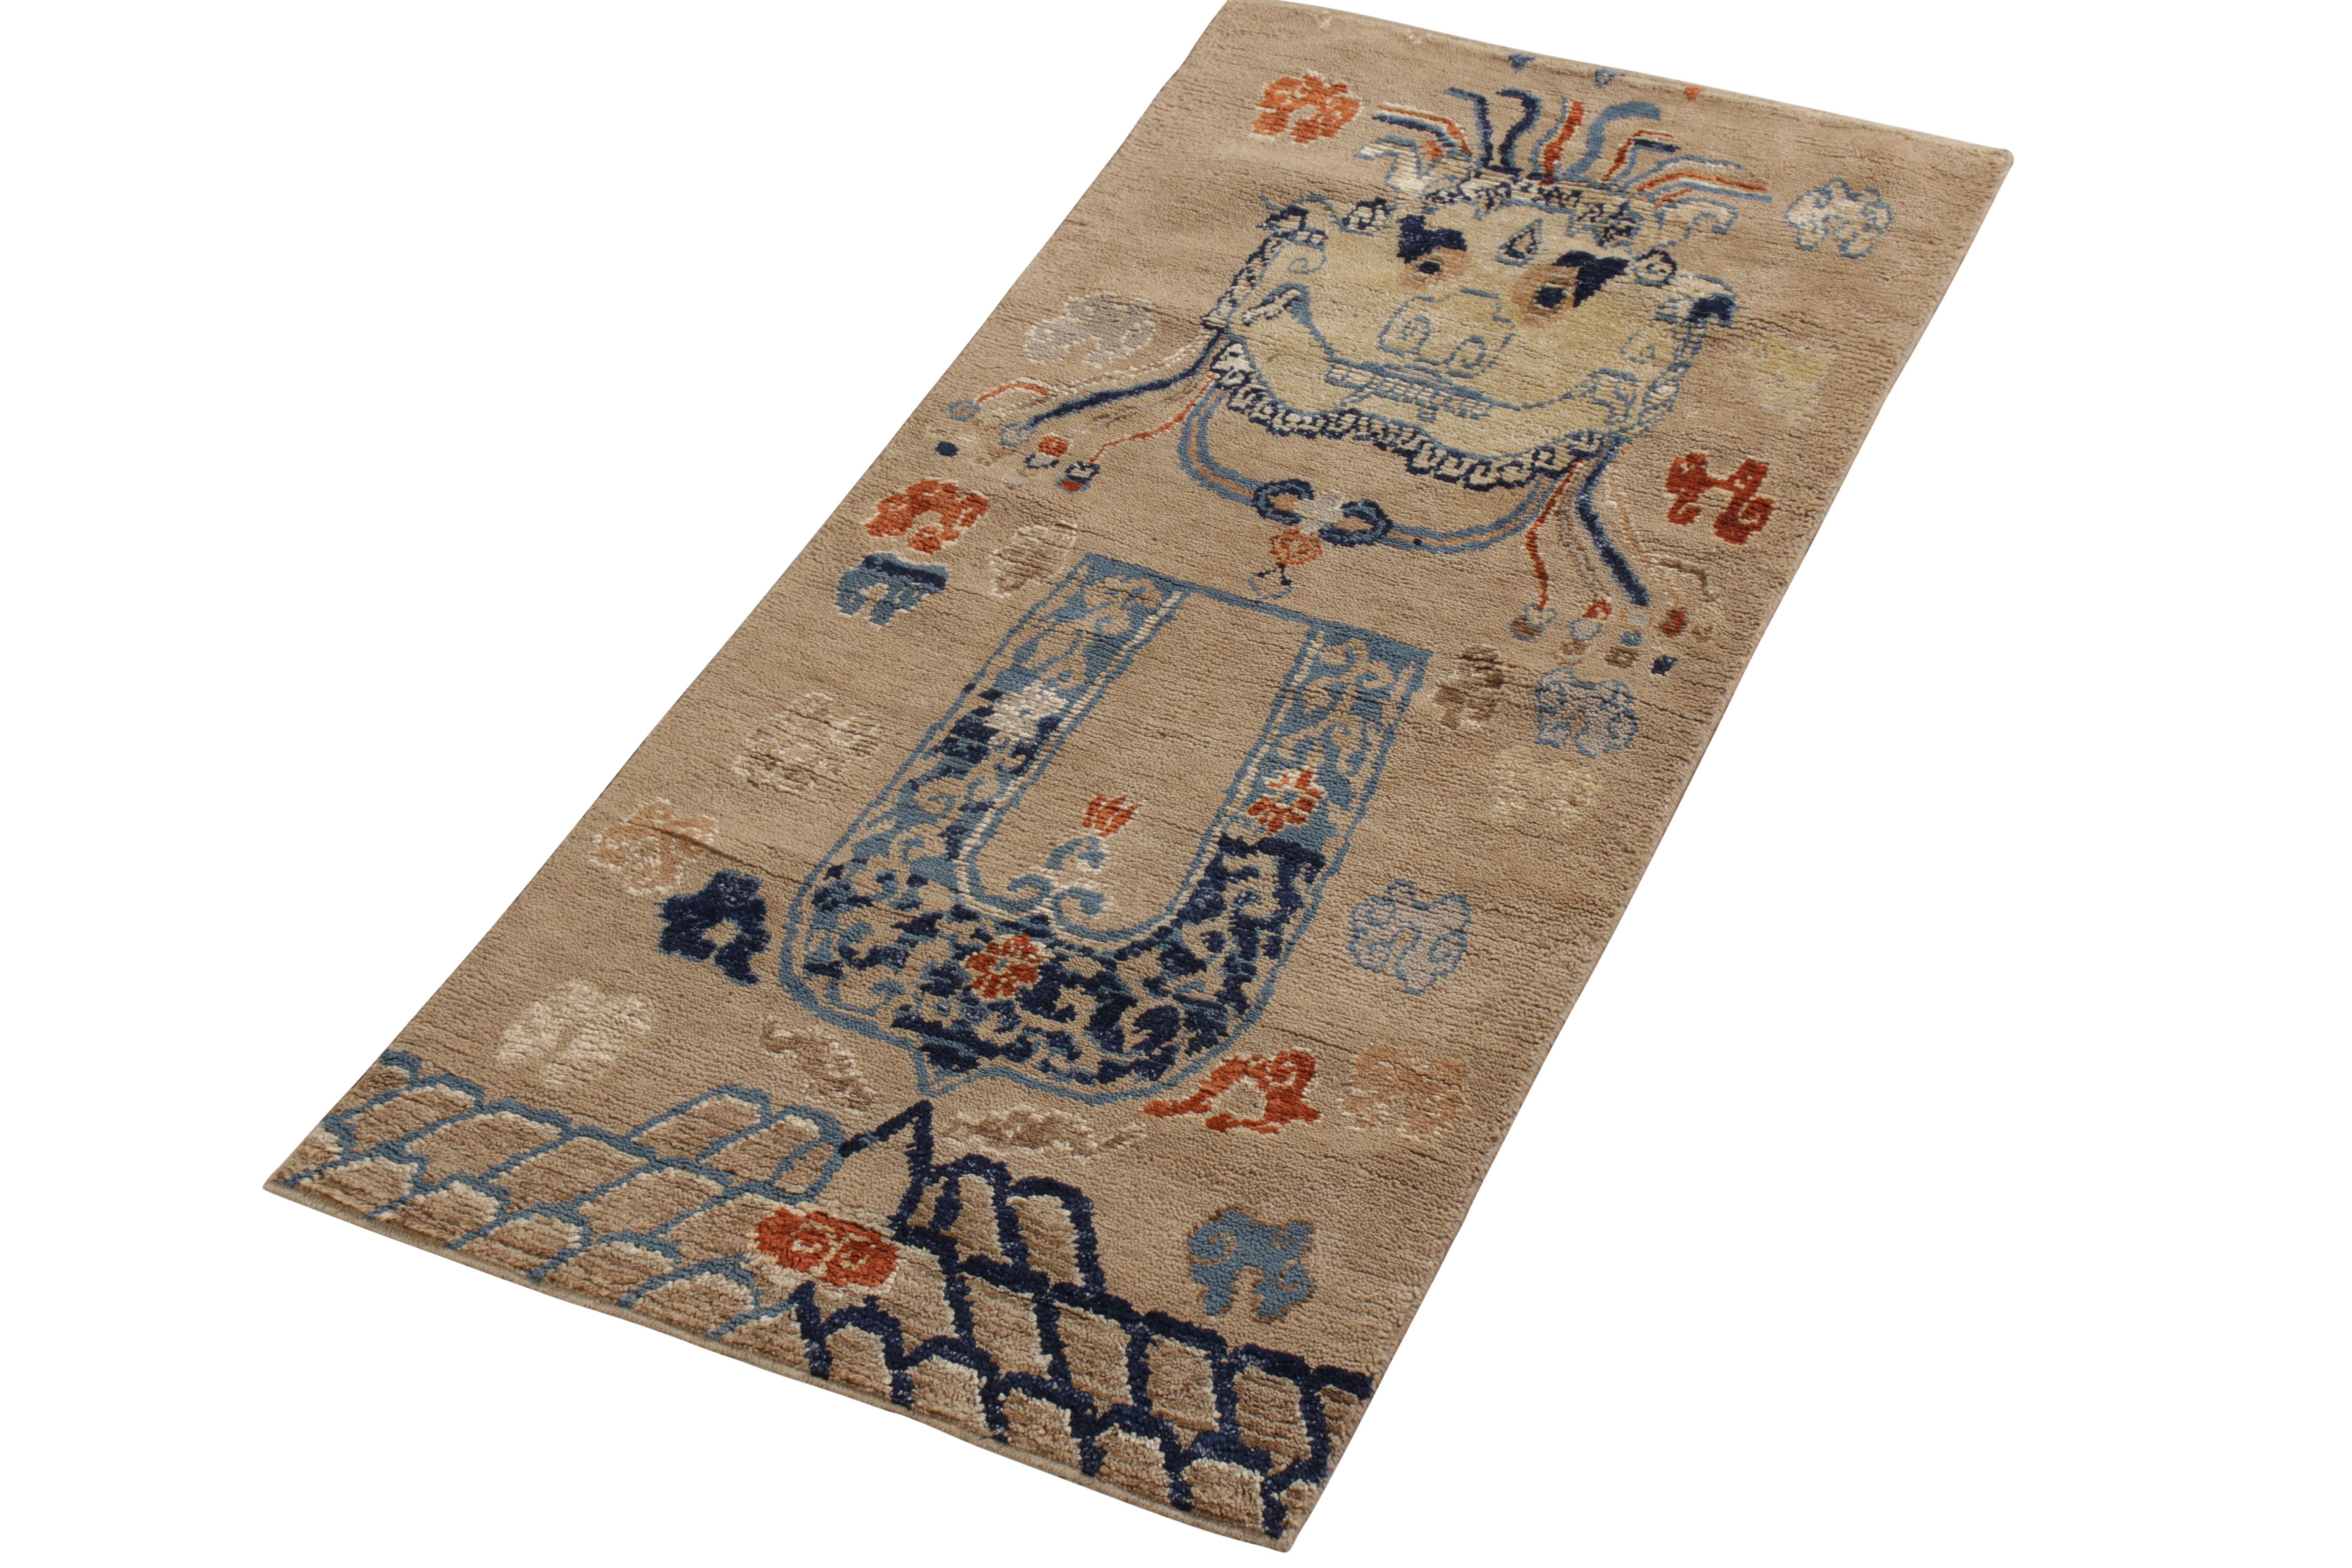 A 2x6 runner inspired by classic Tiger rug styles, from Rug & Kilim’s Burano Collection. Hand knotted in wool, enjoying blue and beige with lively accenting colors prevailing in this iconic cultural homage. Graphic and meticulous alike, exemplifying